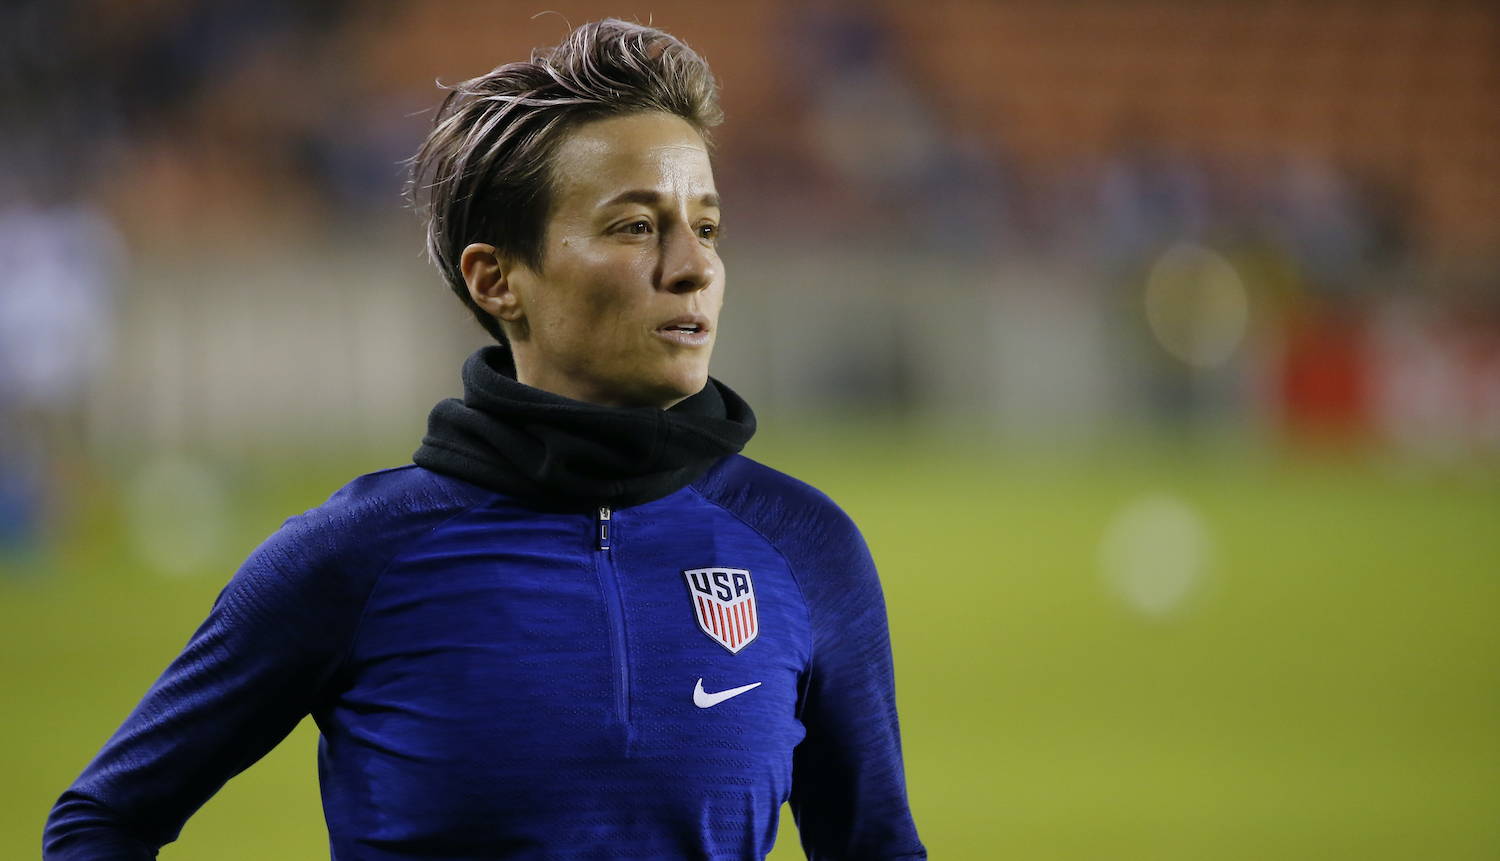 HOUSTON, TEXAS - JANUARY 28: Megan Rapinoe of the United States warms up before playing Haiti during a Group A CONCACAF Women's Olympic Qualifying match at BBVA Compass Stadium on January 28, 2020 in Houston, Texas. (Photo by Bob Levey/Getty Images)